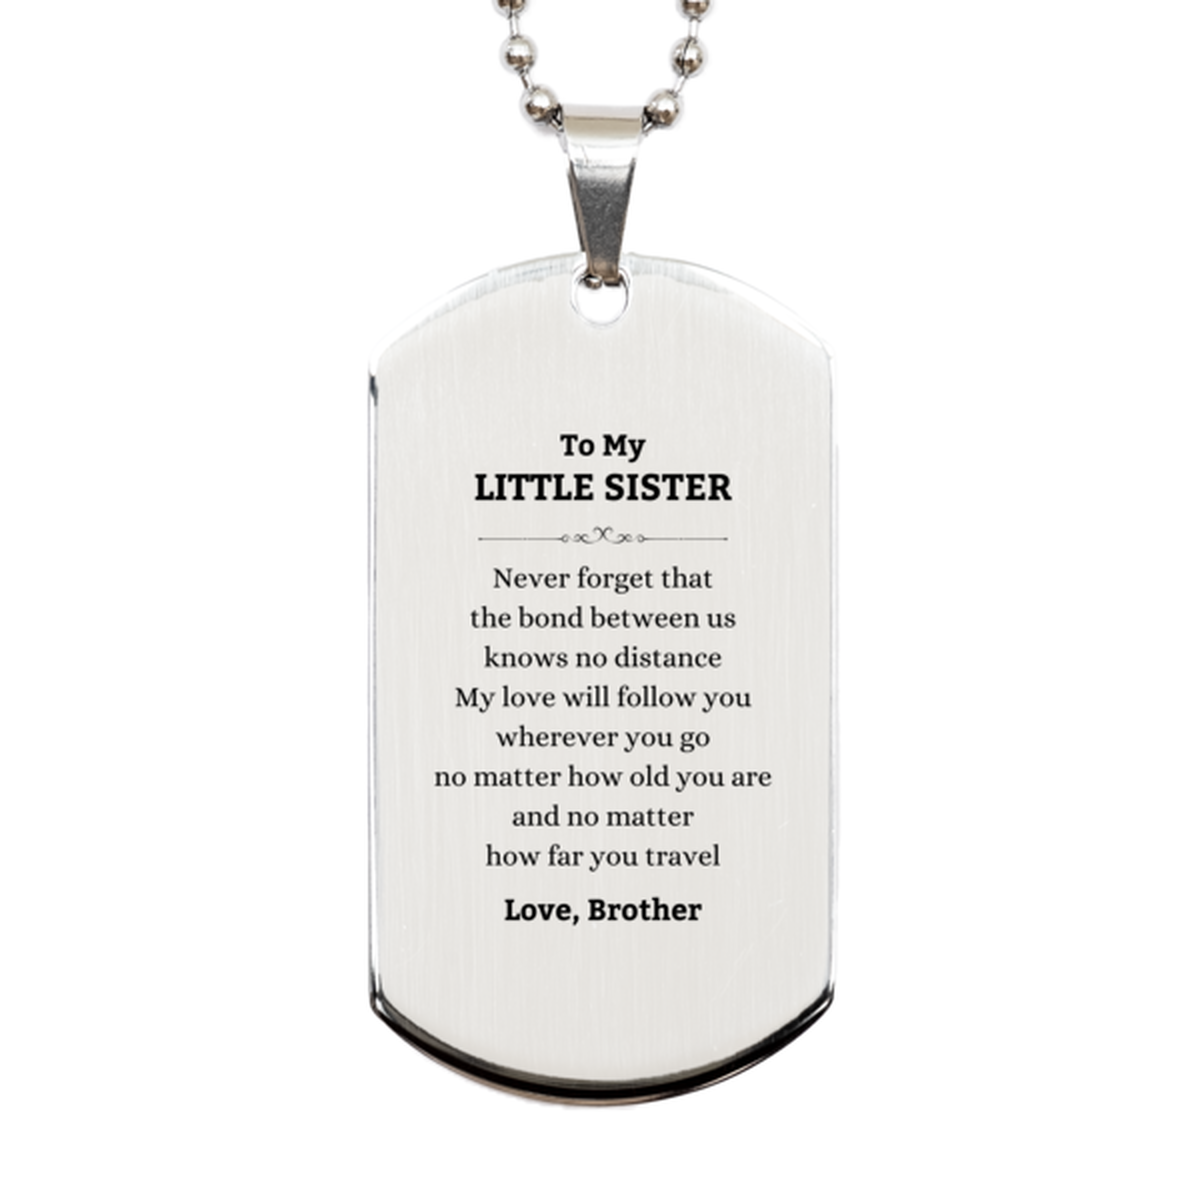 Little Sister Birthday Gifts from Brother, Adjustable Silver Dog Tag for Little Sister Christmas Graduation Unique Gifts Little Sister Never forget that the bond between us knows no distance. Love, Brother